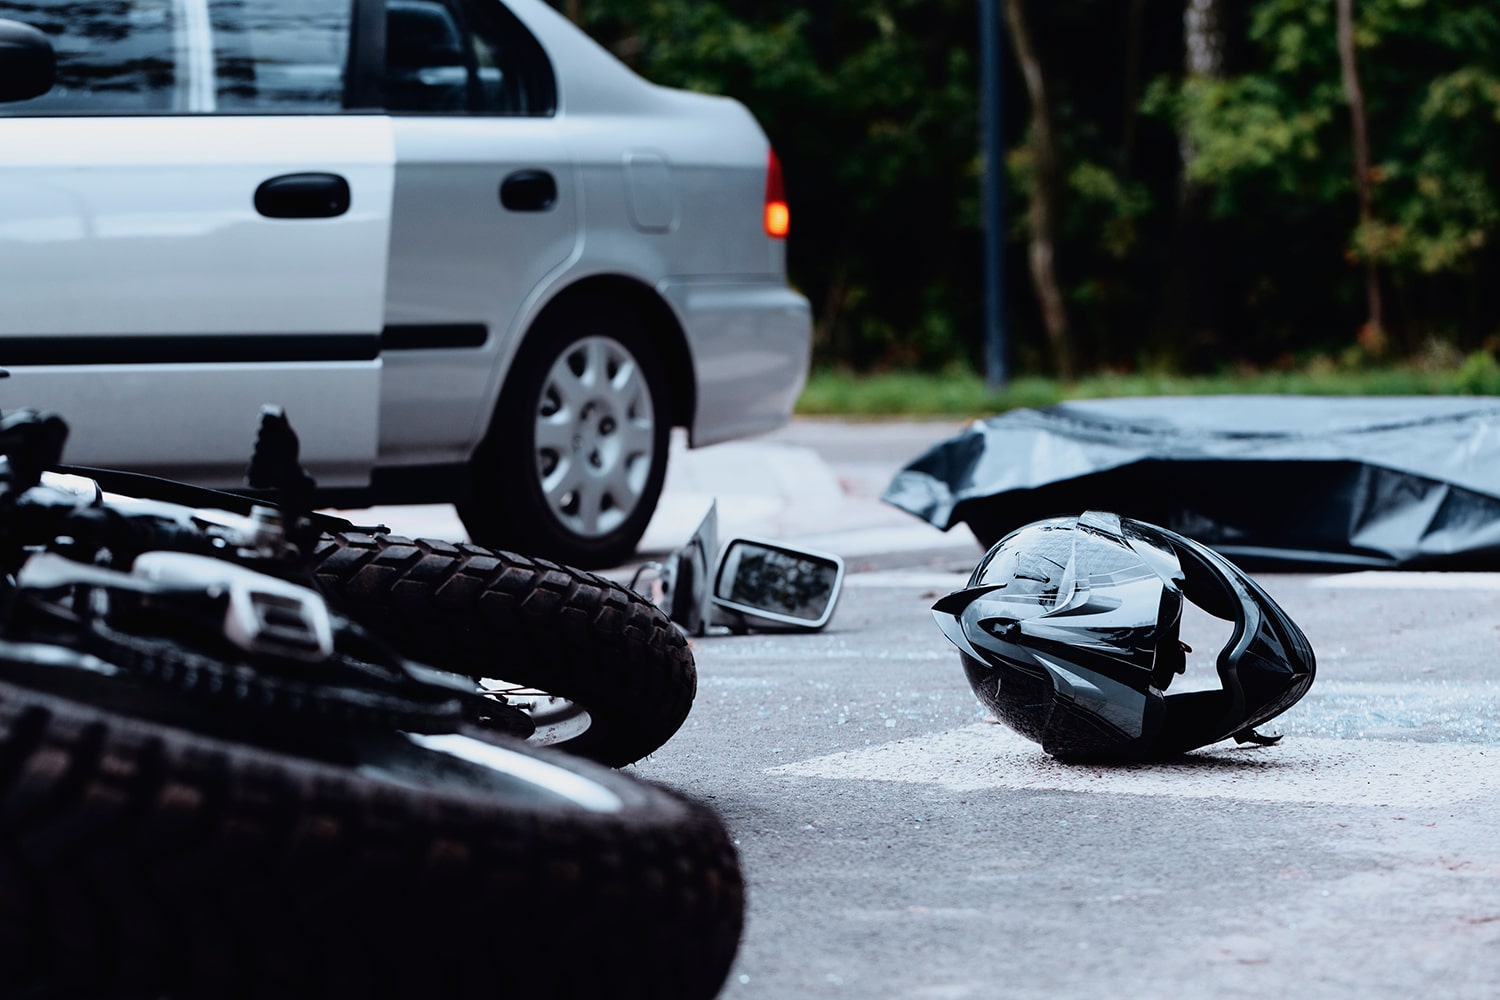 motorcycle accident lawyer San Jose, CA